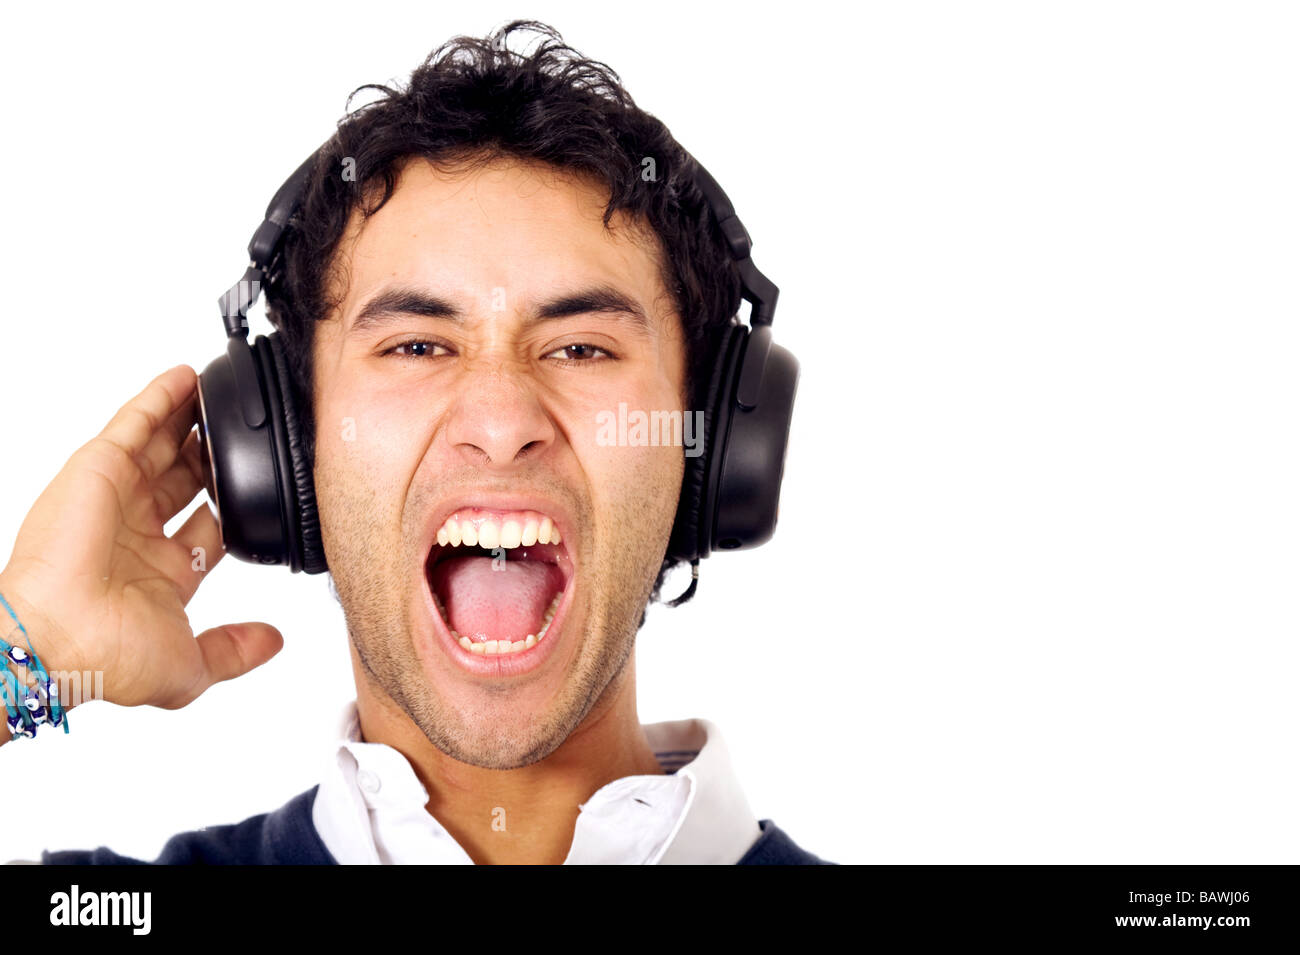 funky guy listening to music Stock Photo